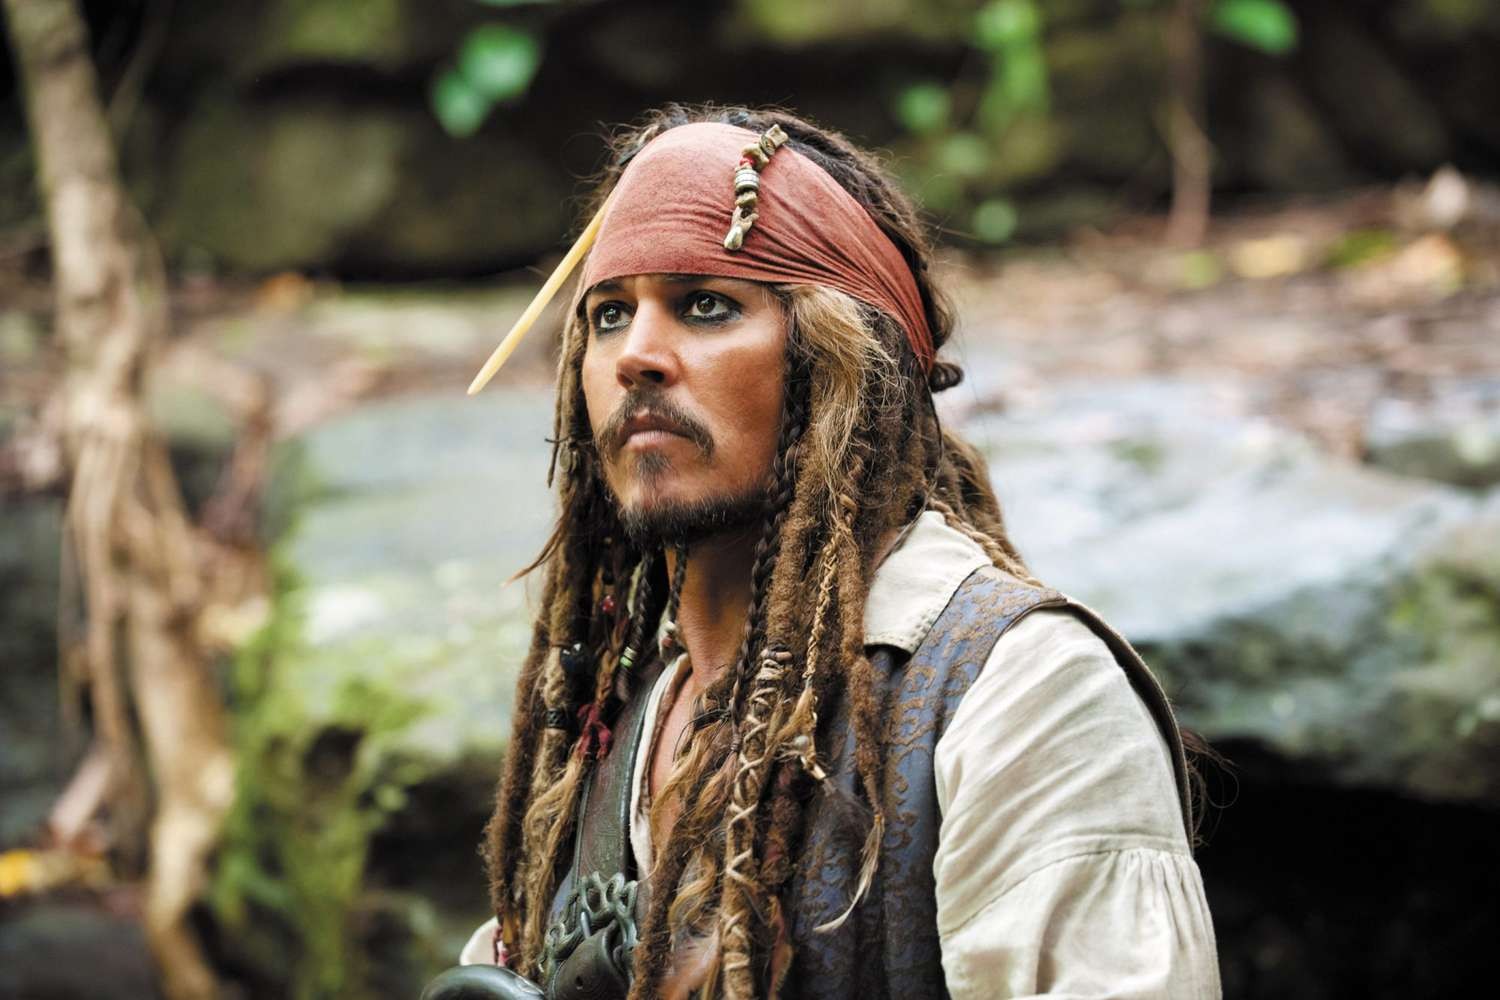 Captain Jack Sprrow rom the Porates of the Caribbean franchise remains Johnny Depp's most popular role